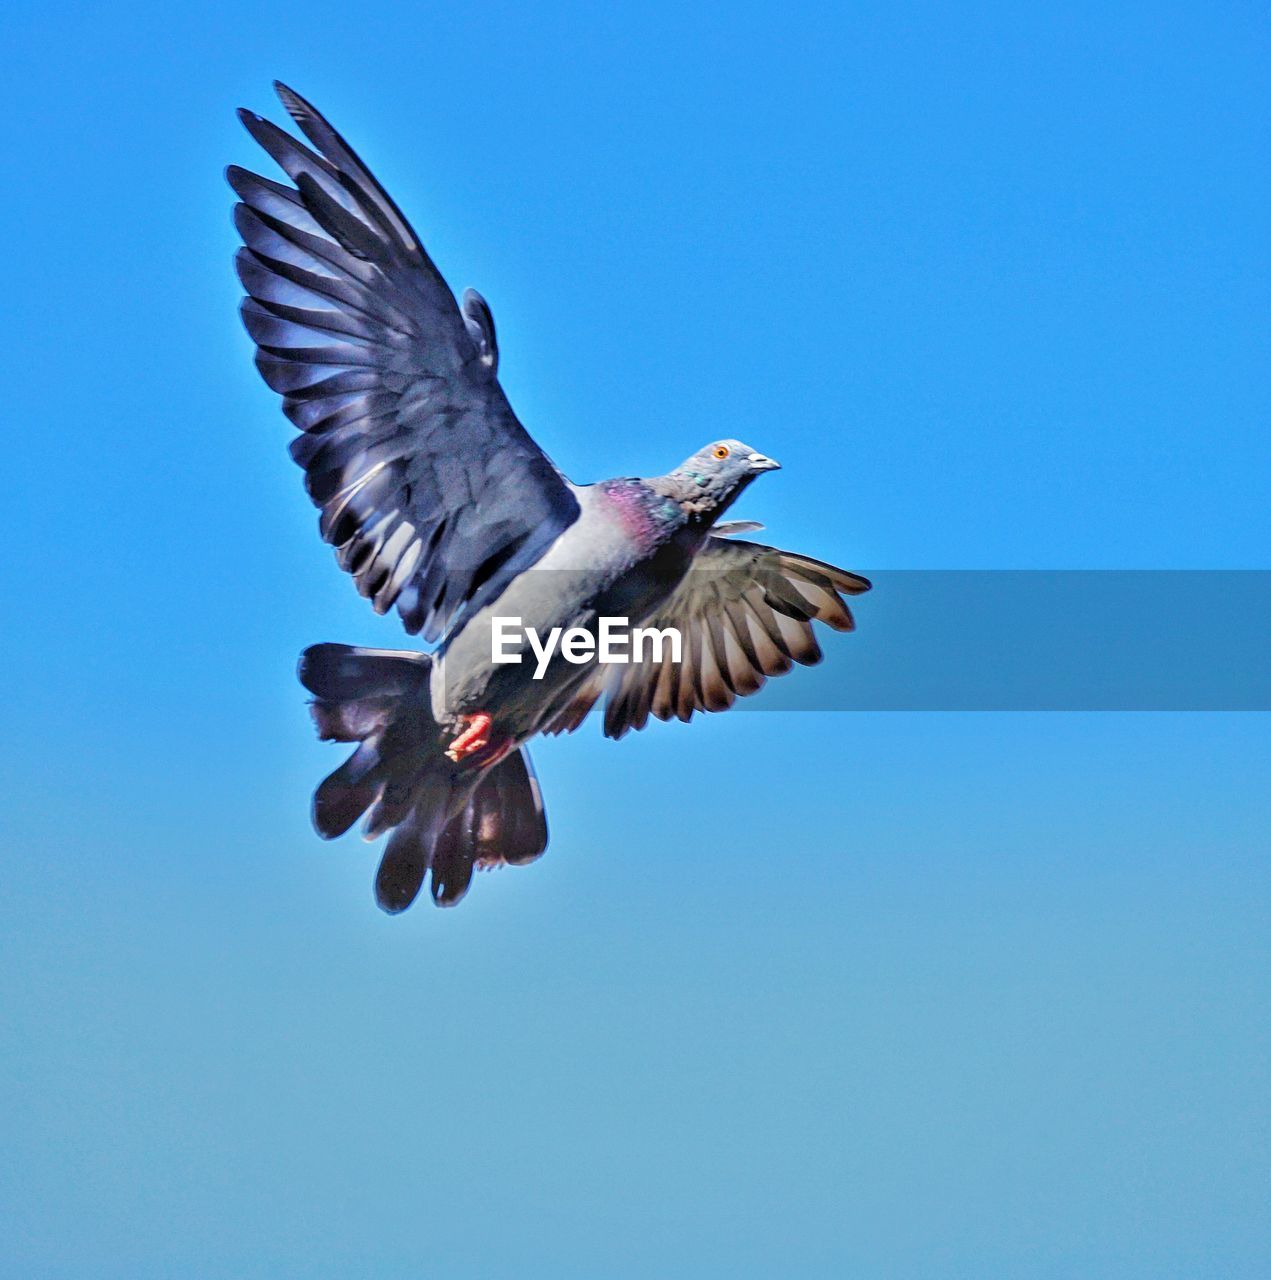 flying, bird, animal, animal themes, spread wings, animal wildlife, wildlife, blue, one animal, sky, animal body part, clear sky, mid-air, motion, nature, animal wing, wing, no people, sunny, outdoors, day, copy space, low angle view, beauty in nature